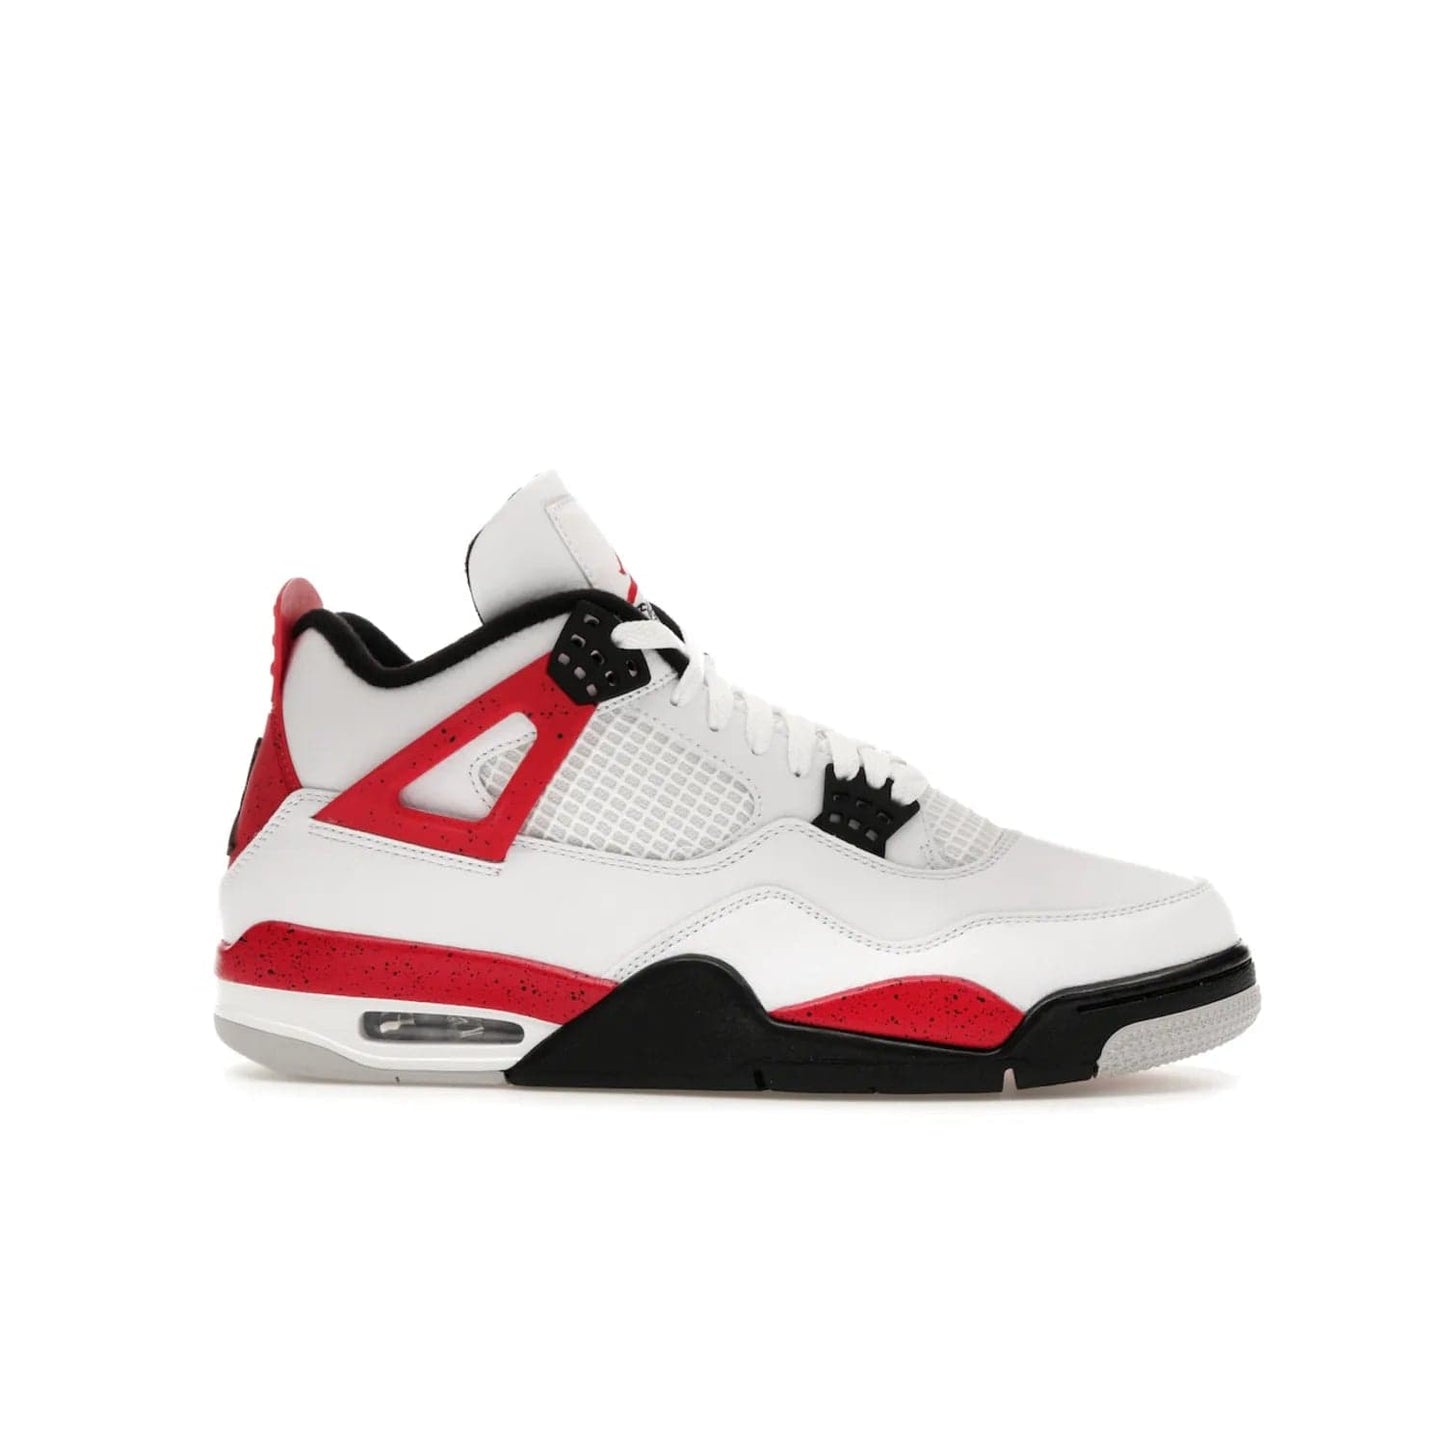 Jordan 4 Retro Red Cement - Image 2 - Only at www.BallersClubKickz.com - Iconic Jordan silhouette with a unique twist. White premium leather uppers with fire red and black detailing. Black, white, and fire red midsole with mesh detailing and Jumpman logo. Jordan 4 Retro Red Cement released with premium price.